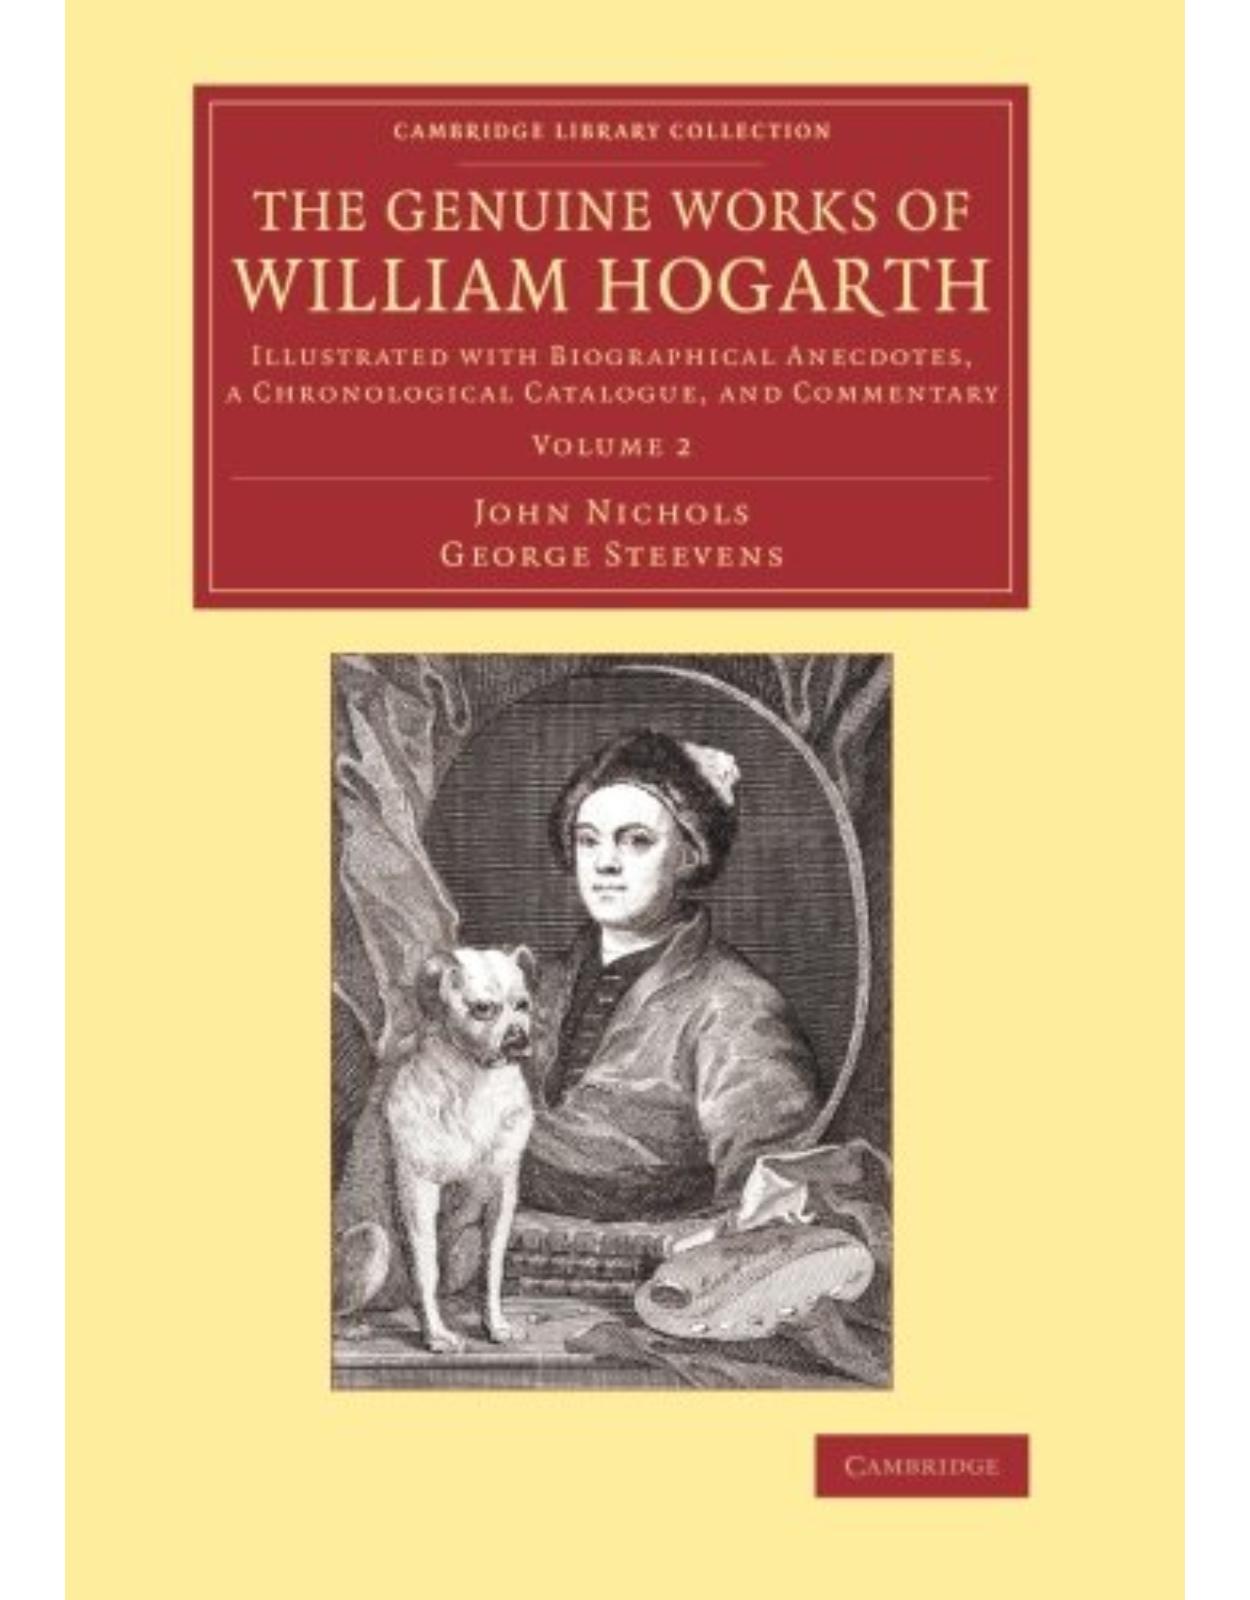 The Genuine Works of William Hogarth: Illustrated with Biographical Anecdotes, a Chronological Catalogue, and Commentary: Volume 2 (Cambridge Library Collection - Art and Architecture)